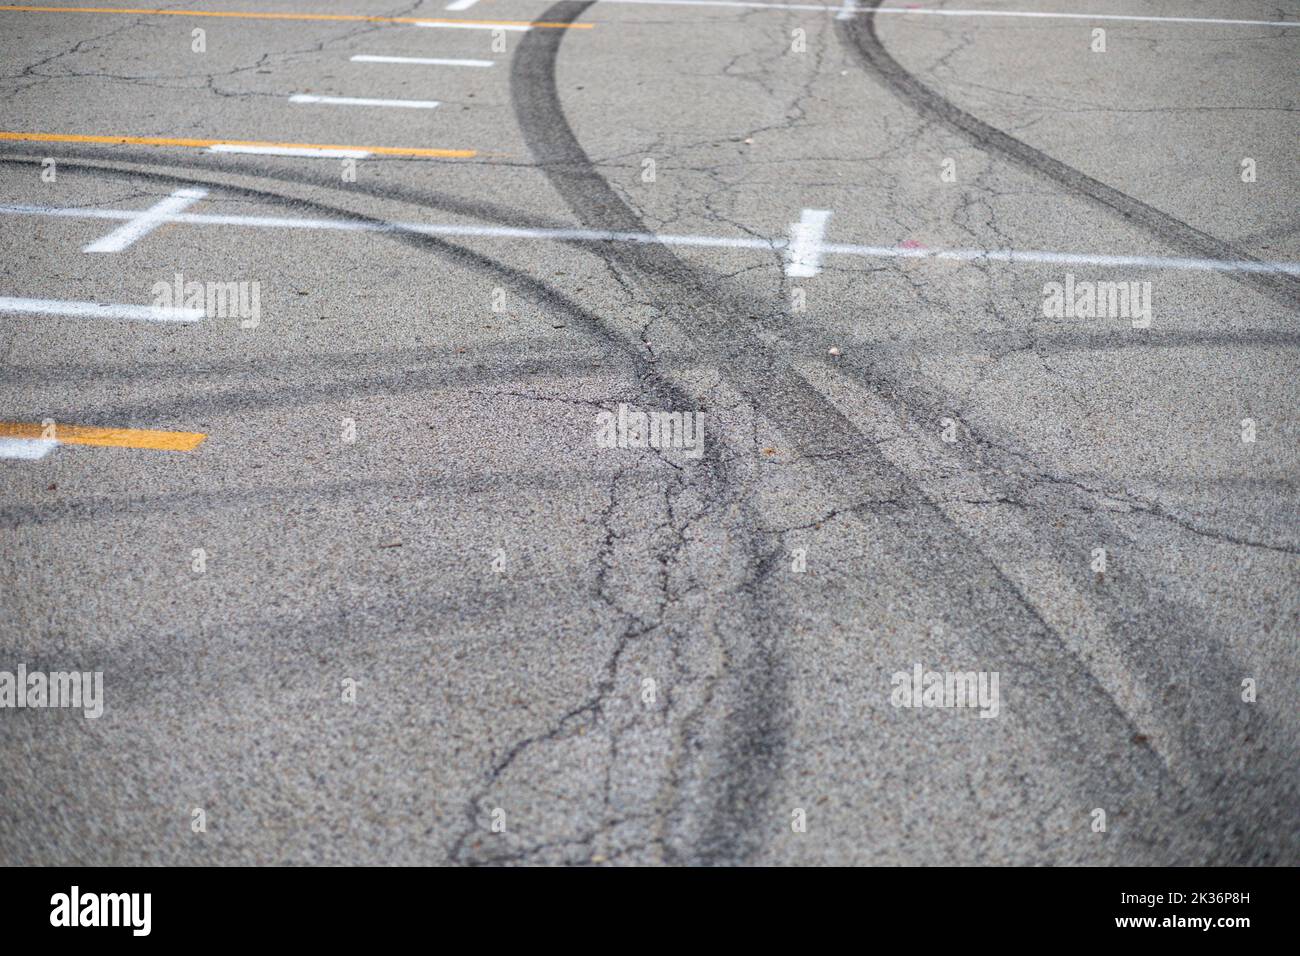 black car tracks in the middle of a parking lot Stock Photo